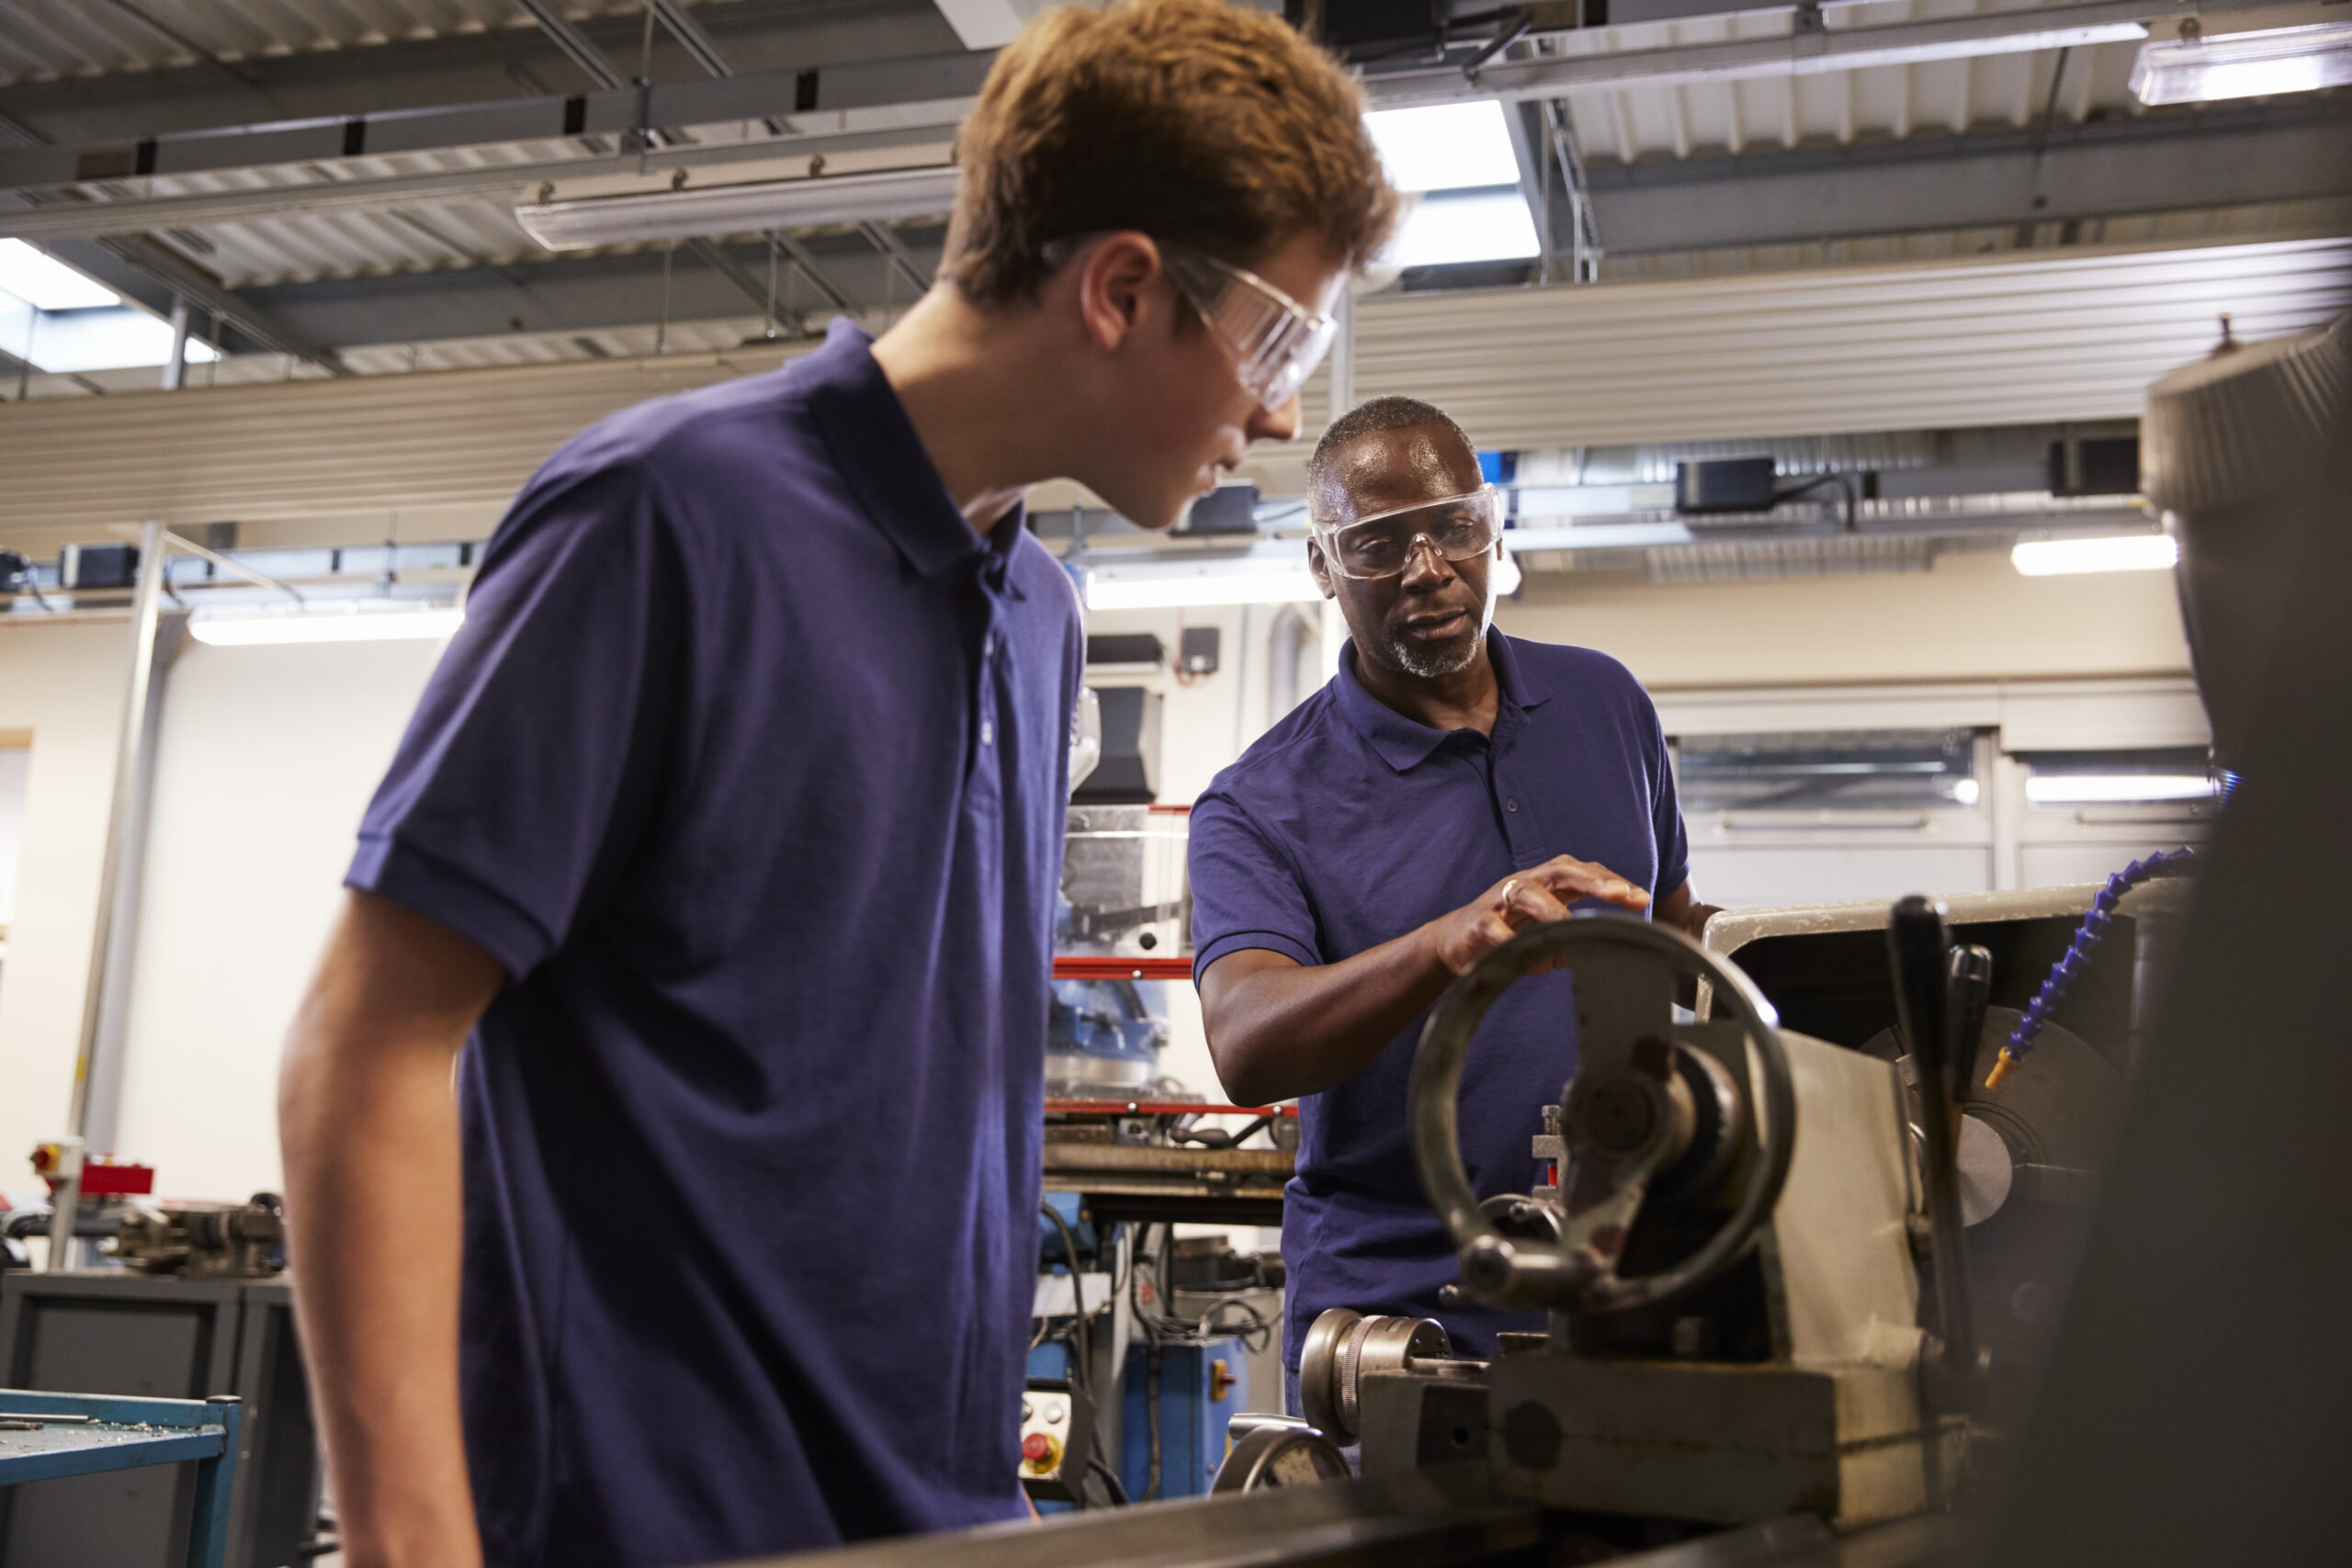 US DEPARTMENT OF LABOR TO FUEL REGISTERED APPRENTICESHIPS’ GROWTH WITH APPRENTICESHIPUSA BRANDING EFFORT, PUBLIC CONVERSATIONS